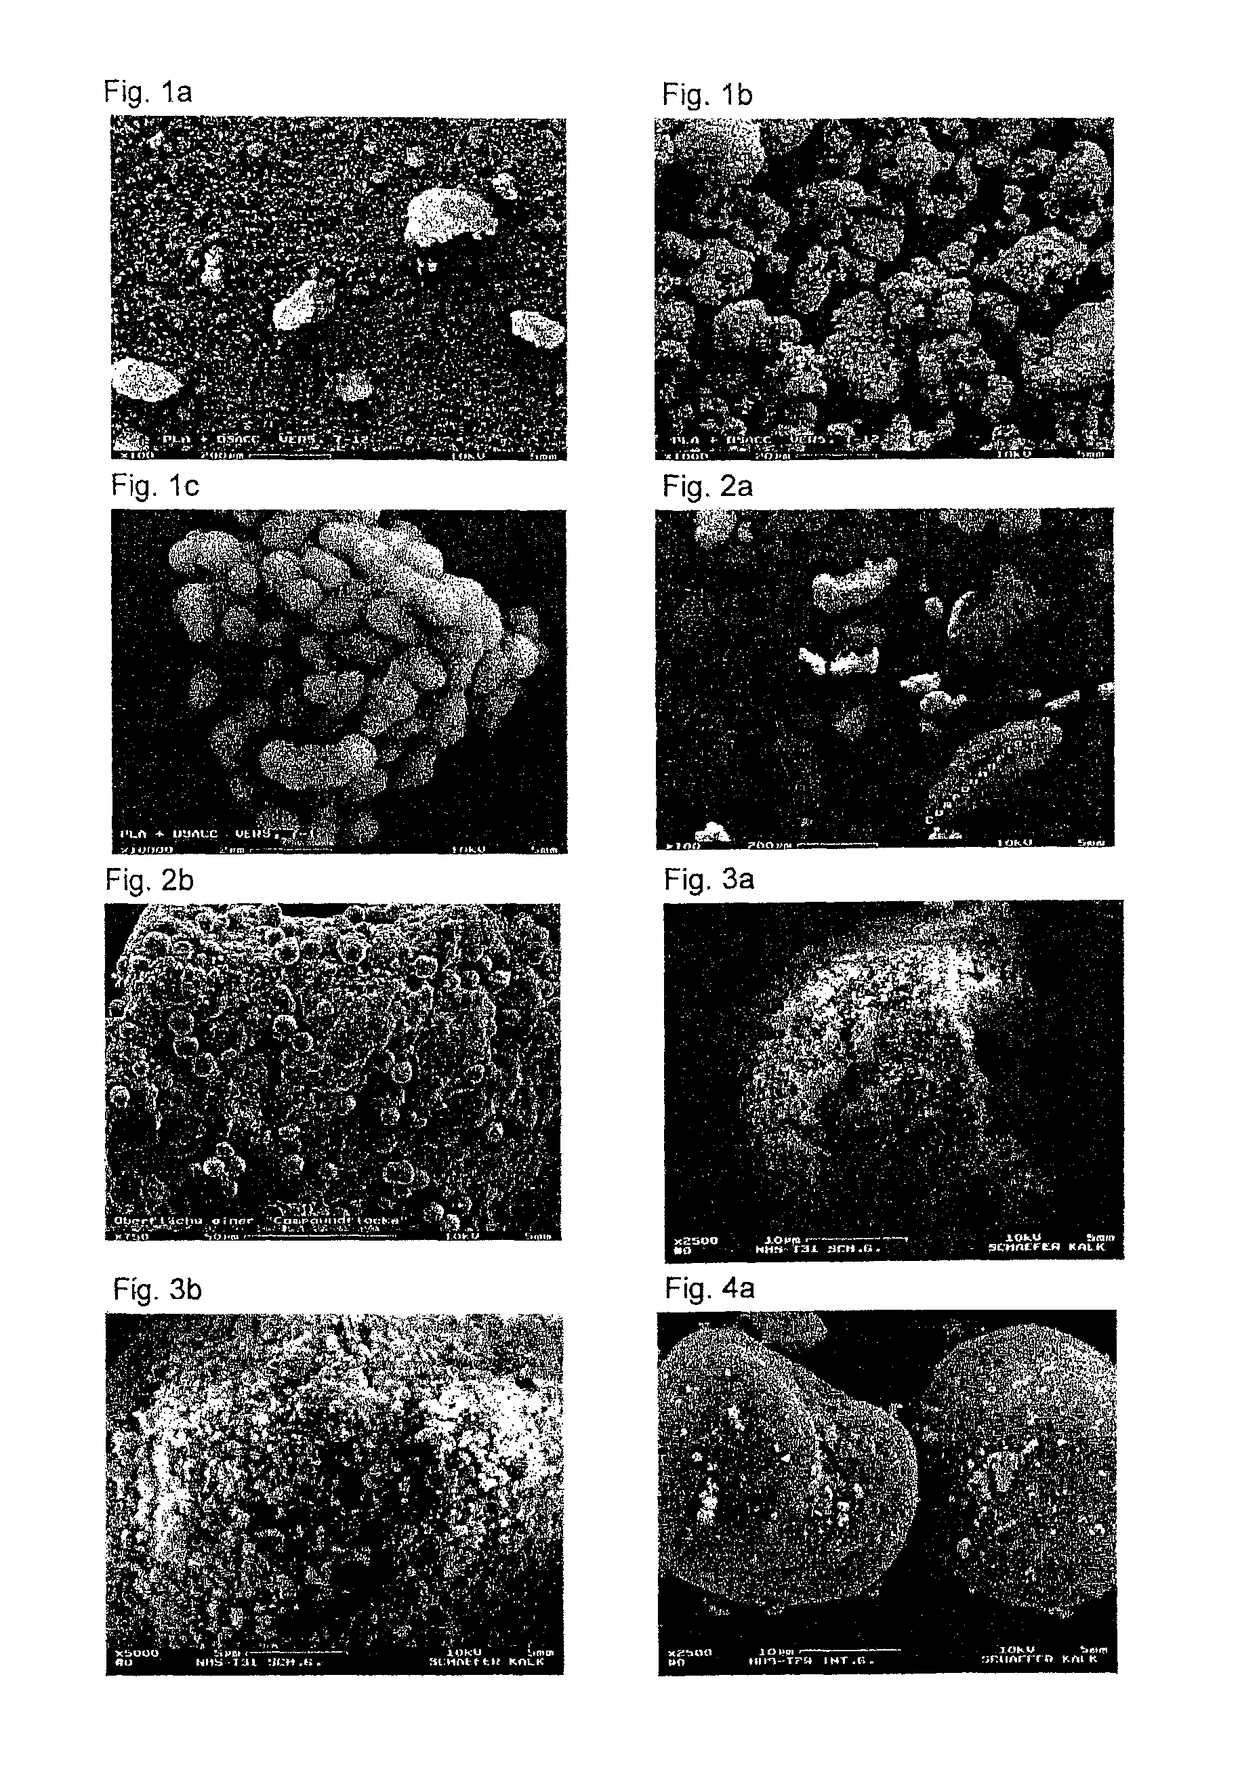 Microstructured composite particles